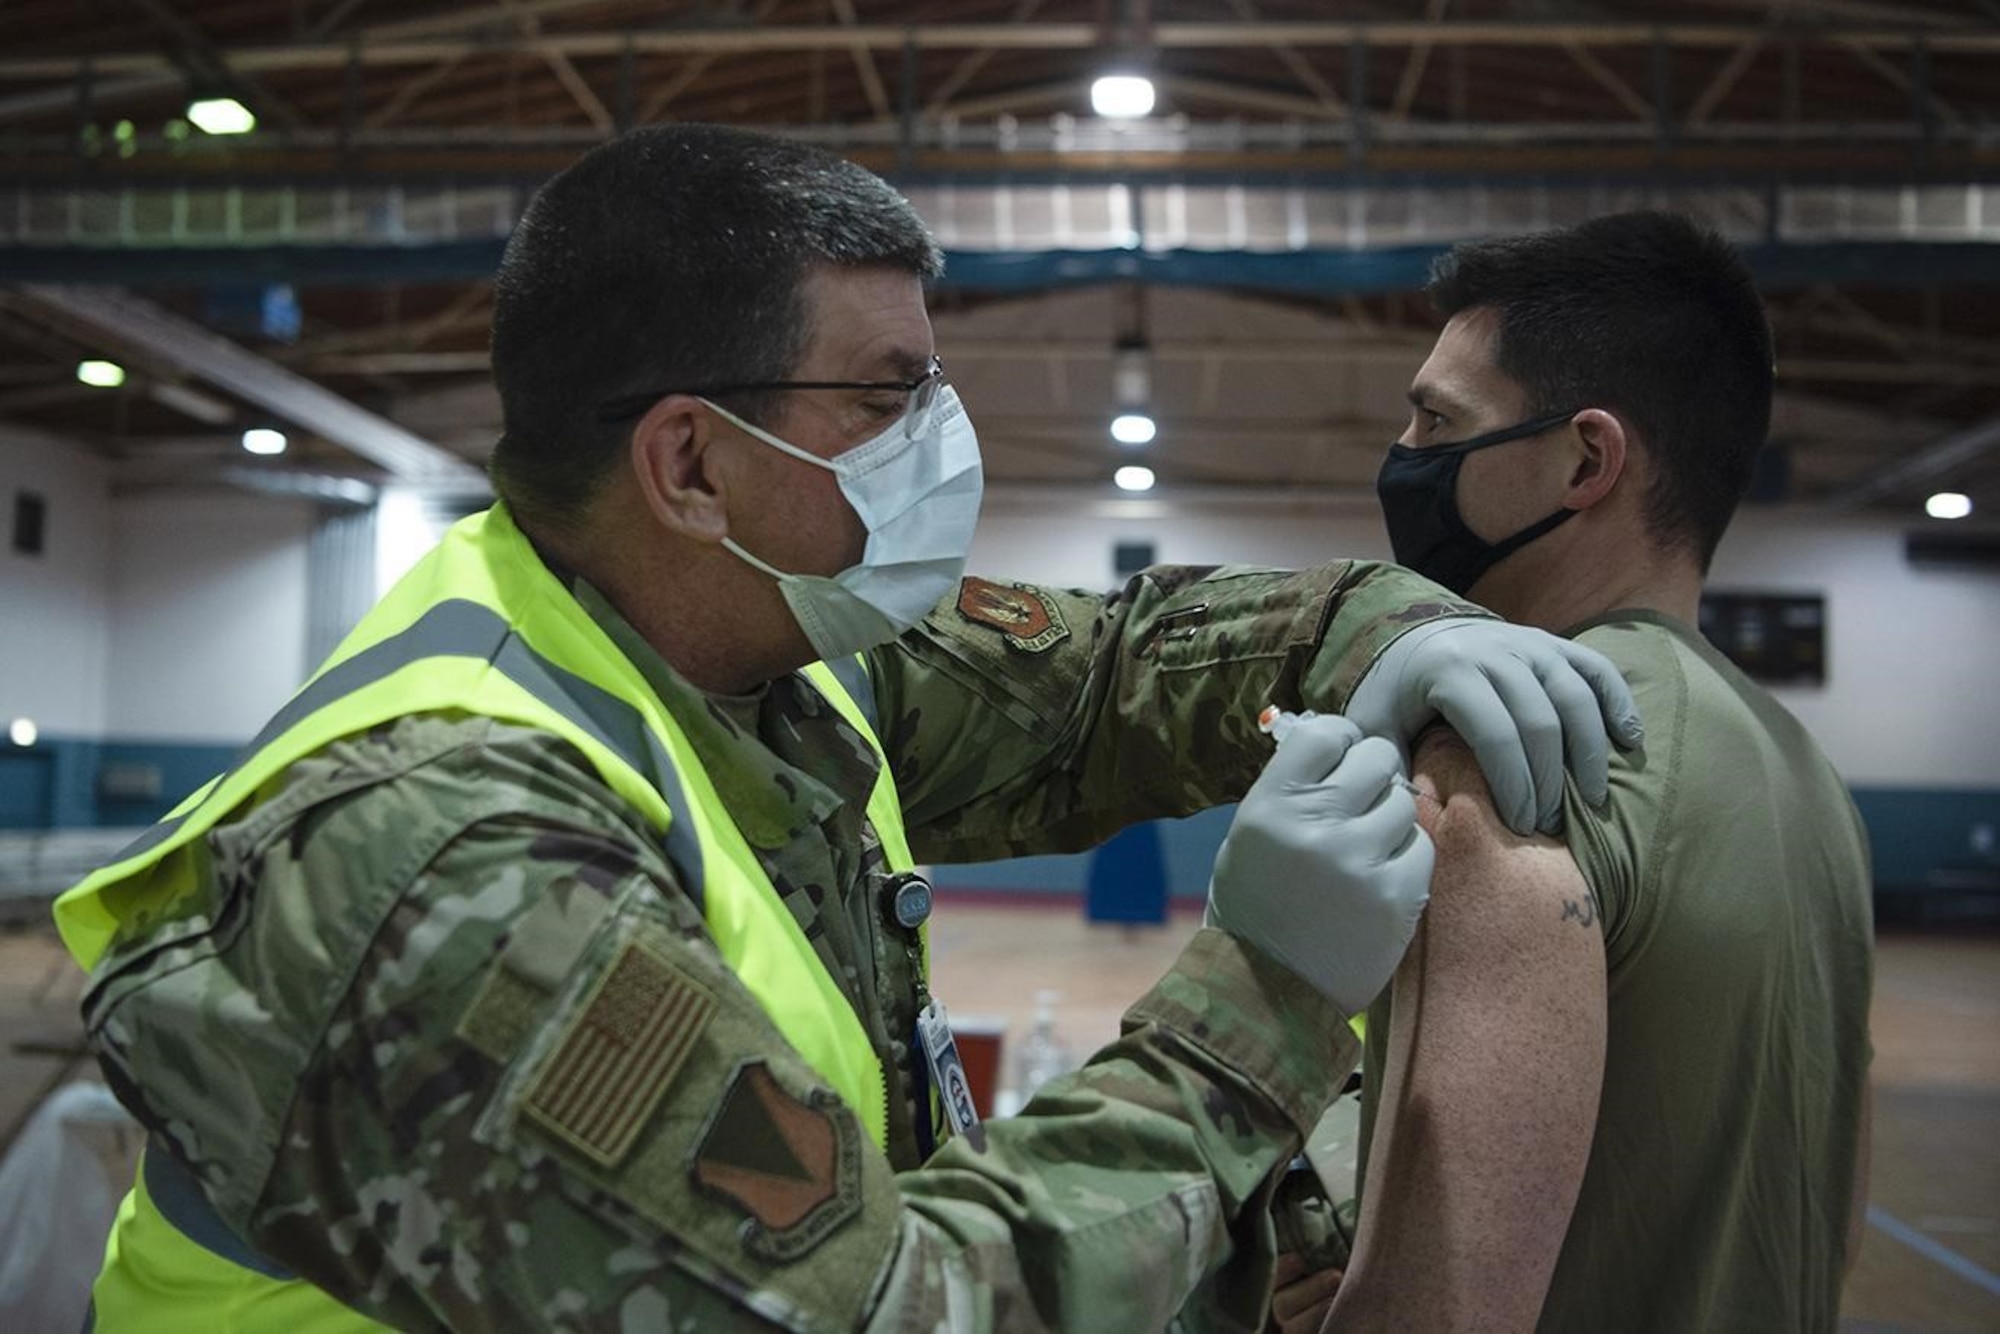 U.S. Air Force Capt. Christopher J. Gresham, 569th U.S. Forces Police Squadron operations officer, receives a COVID-19 vaccination at Ramstein Air Base, Germany, Jan. 4, 2021. Vaccine distribution is anticipated to continue over the next several months through a Defense Department-wide phased vaccination approach. (U.S. Air Force photo by Senior Airman Jennifer Gonzales)